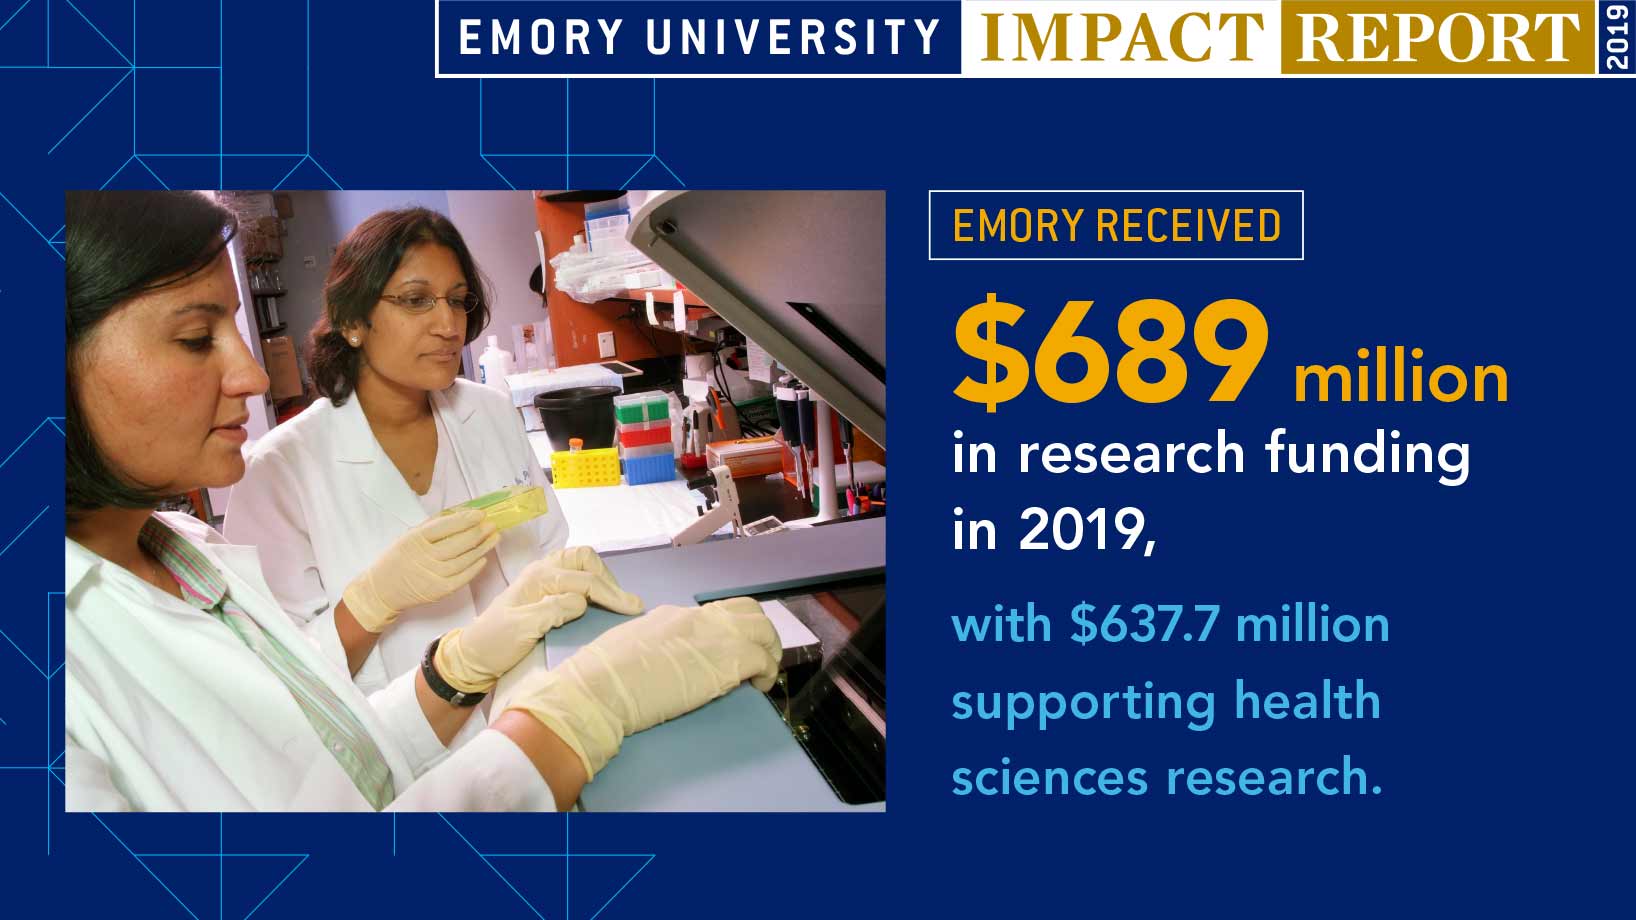 Emory received $689 million in research funding in 2019, with $637.7 million supporting health sciences research. 